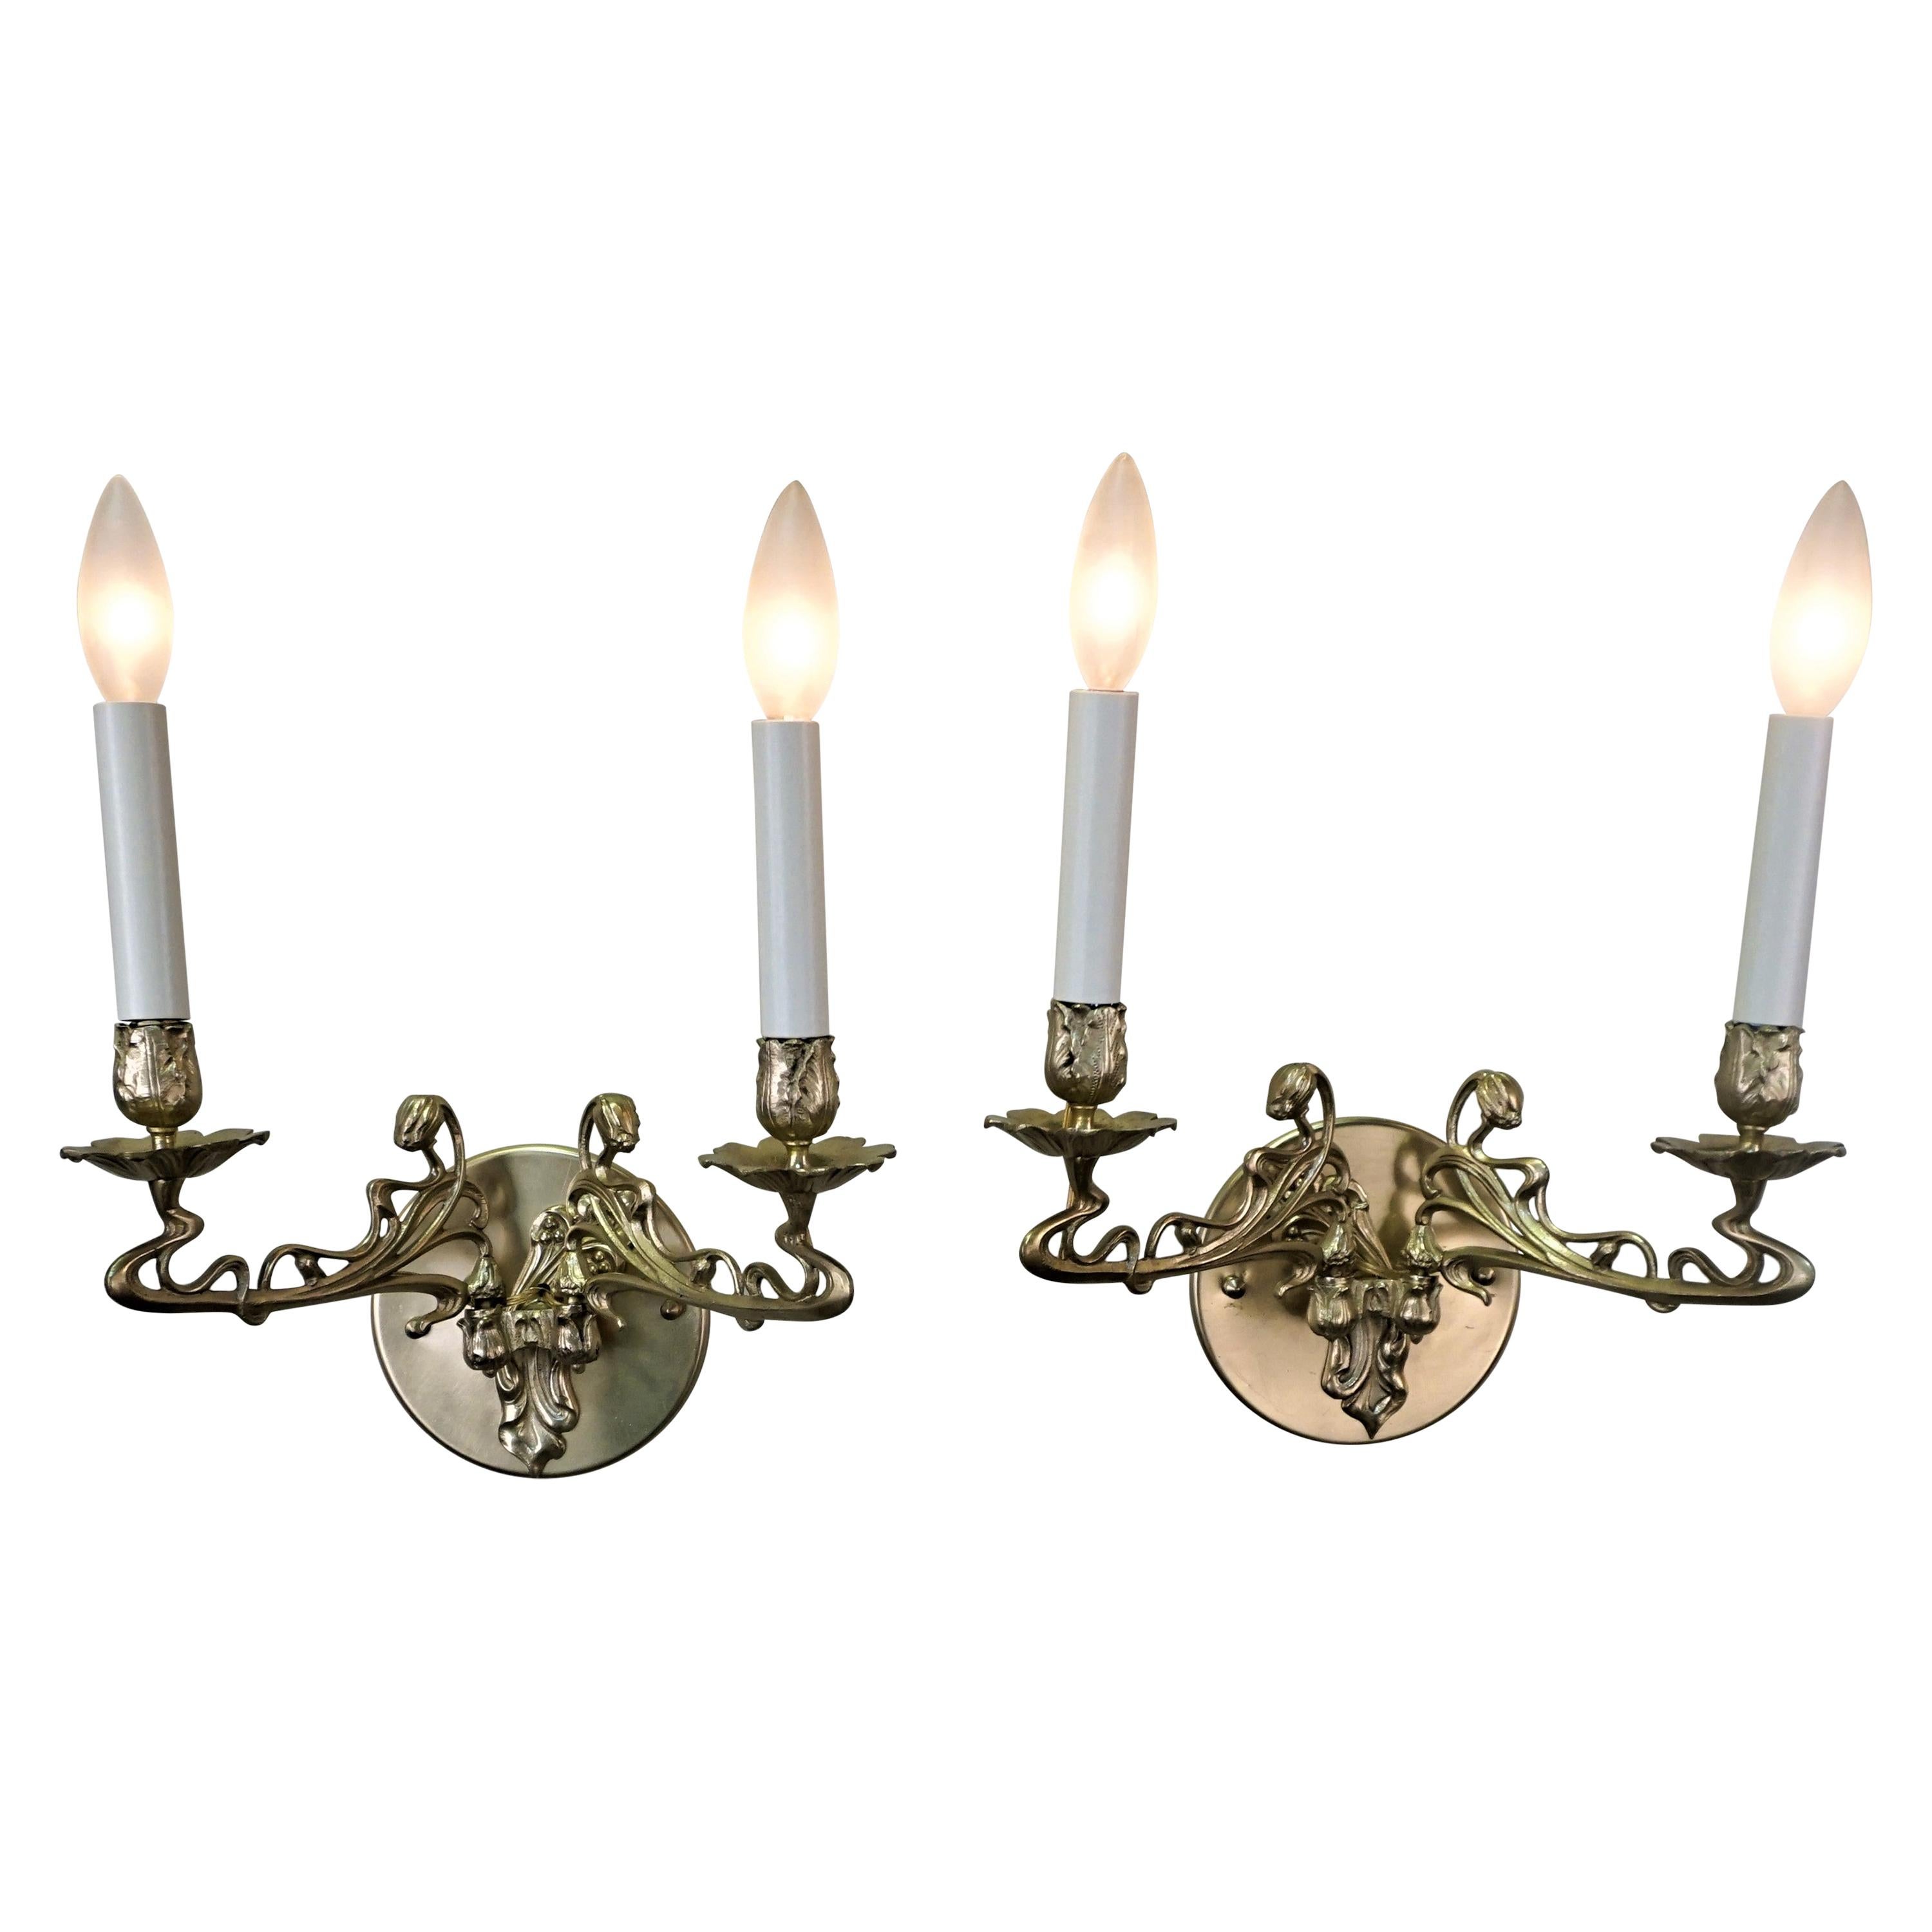 Pair of Late 19th Century Art Nouveau Bronze Piano-Wall sconces